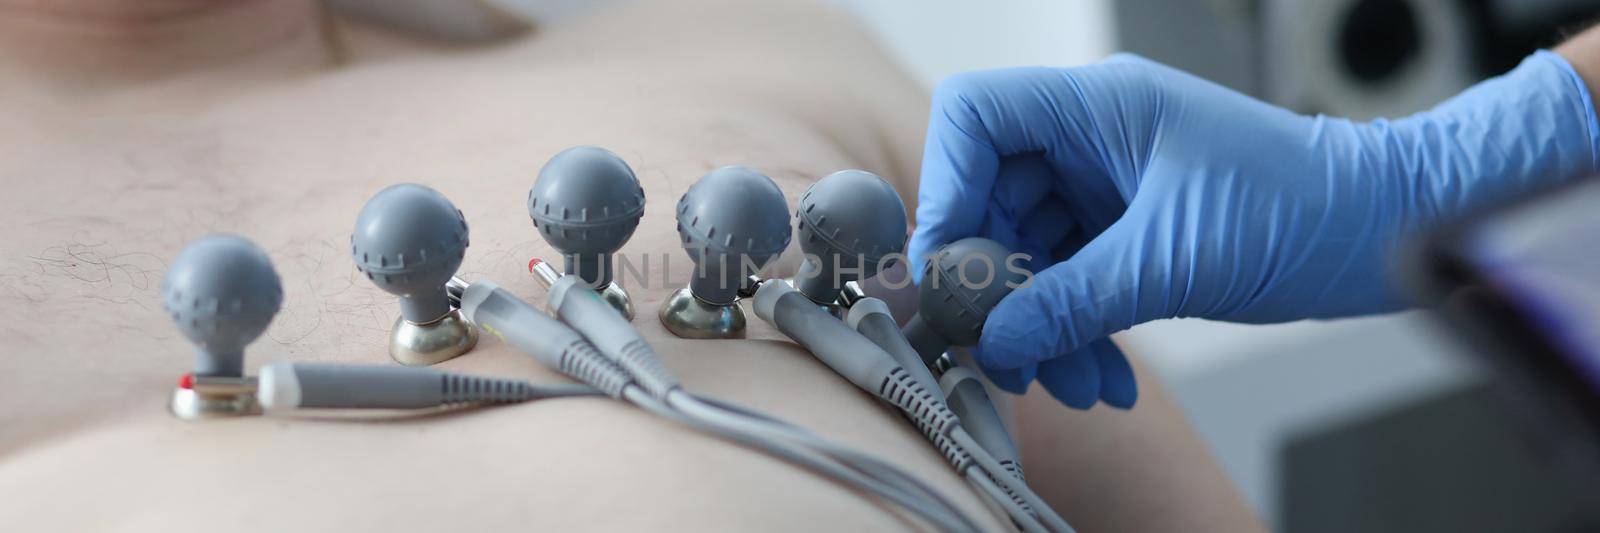 Nurse attaching suction cups to patient chest to record electrocardiogram closeup. ECG diagnostics of rhythm and conduction disorders concept